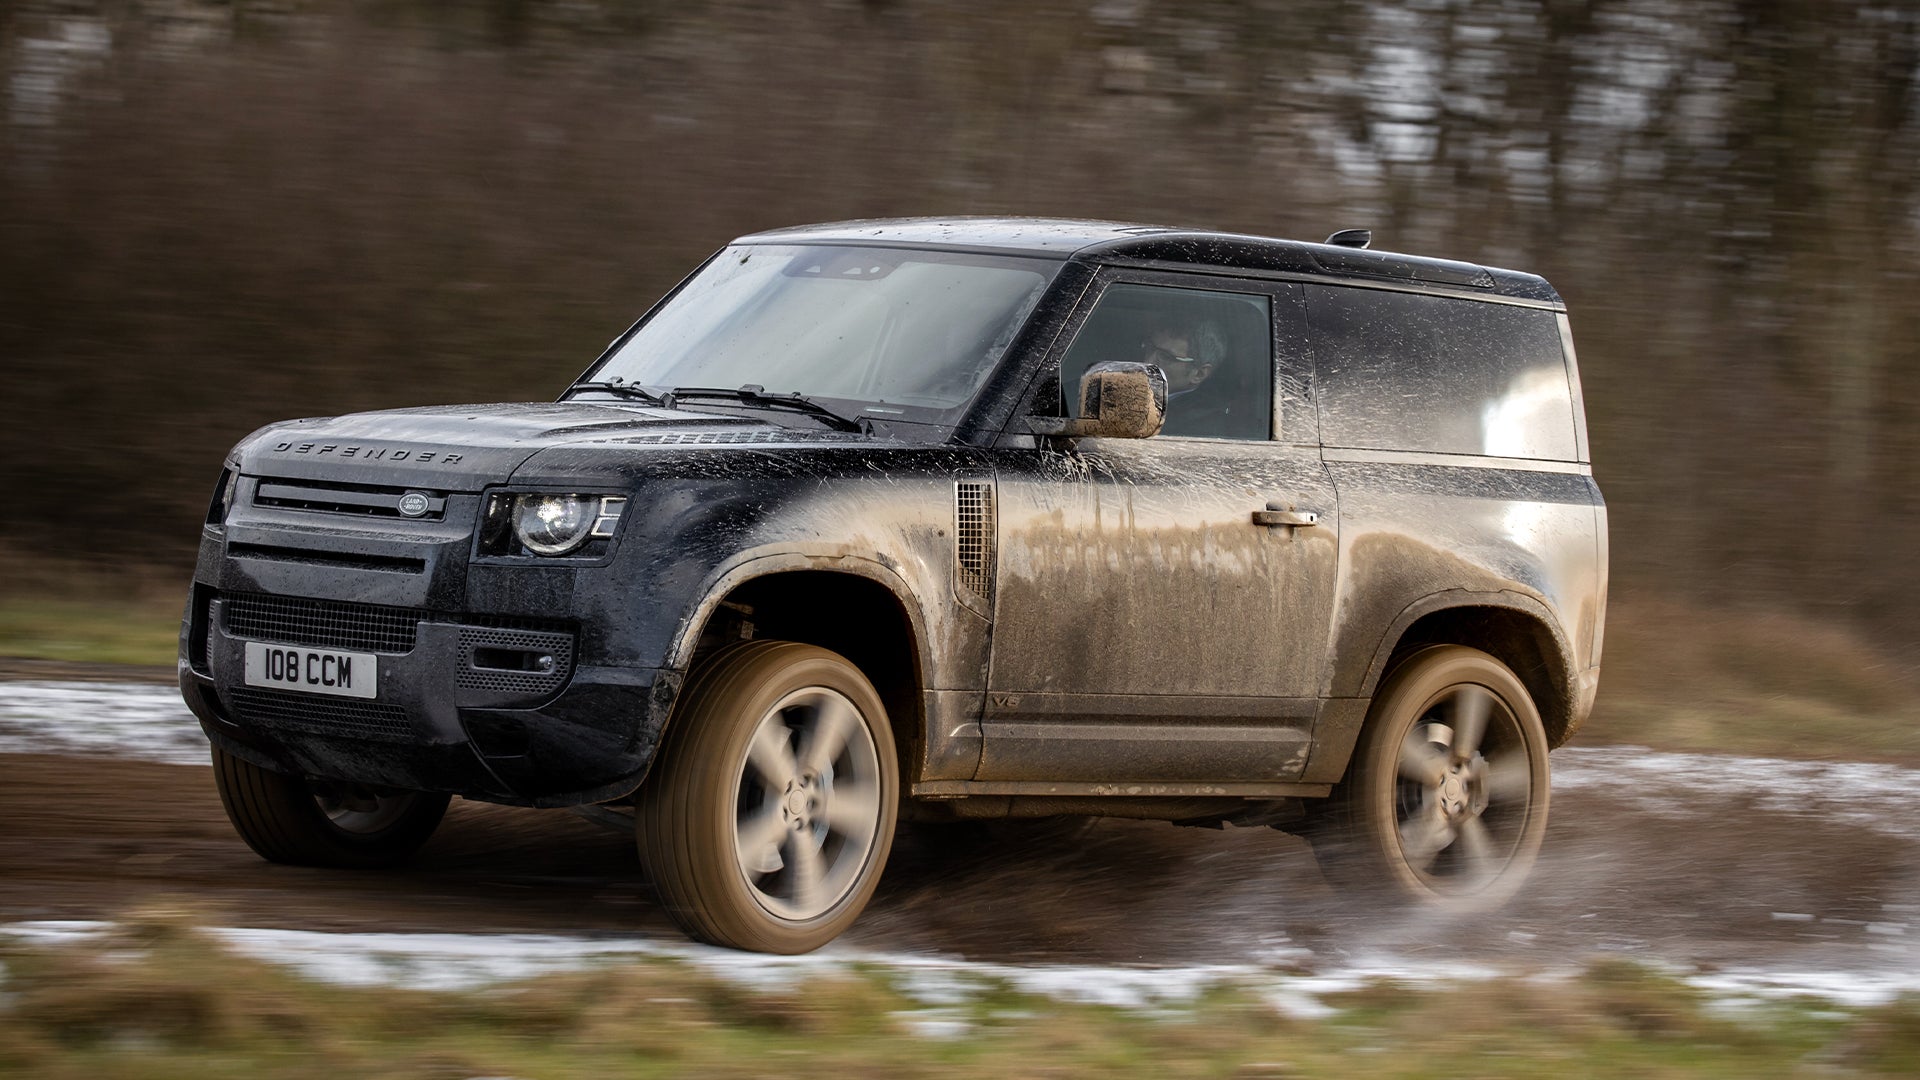 2022 Land Rover Defender V8 Jams a 5.0L, 518-HP Supercharged Mill in JLR's  Most Capable Truck